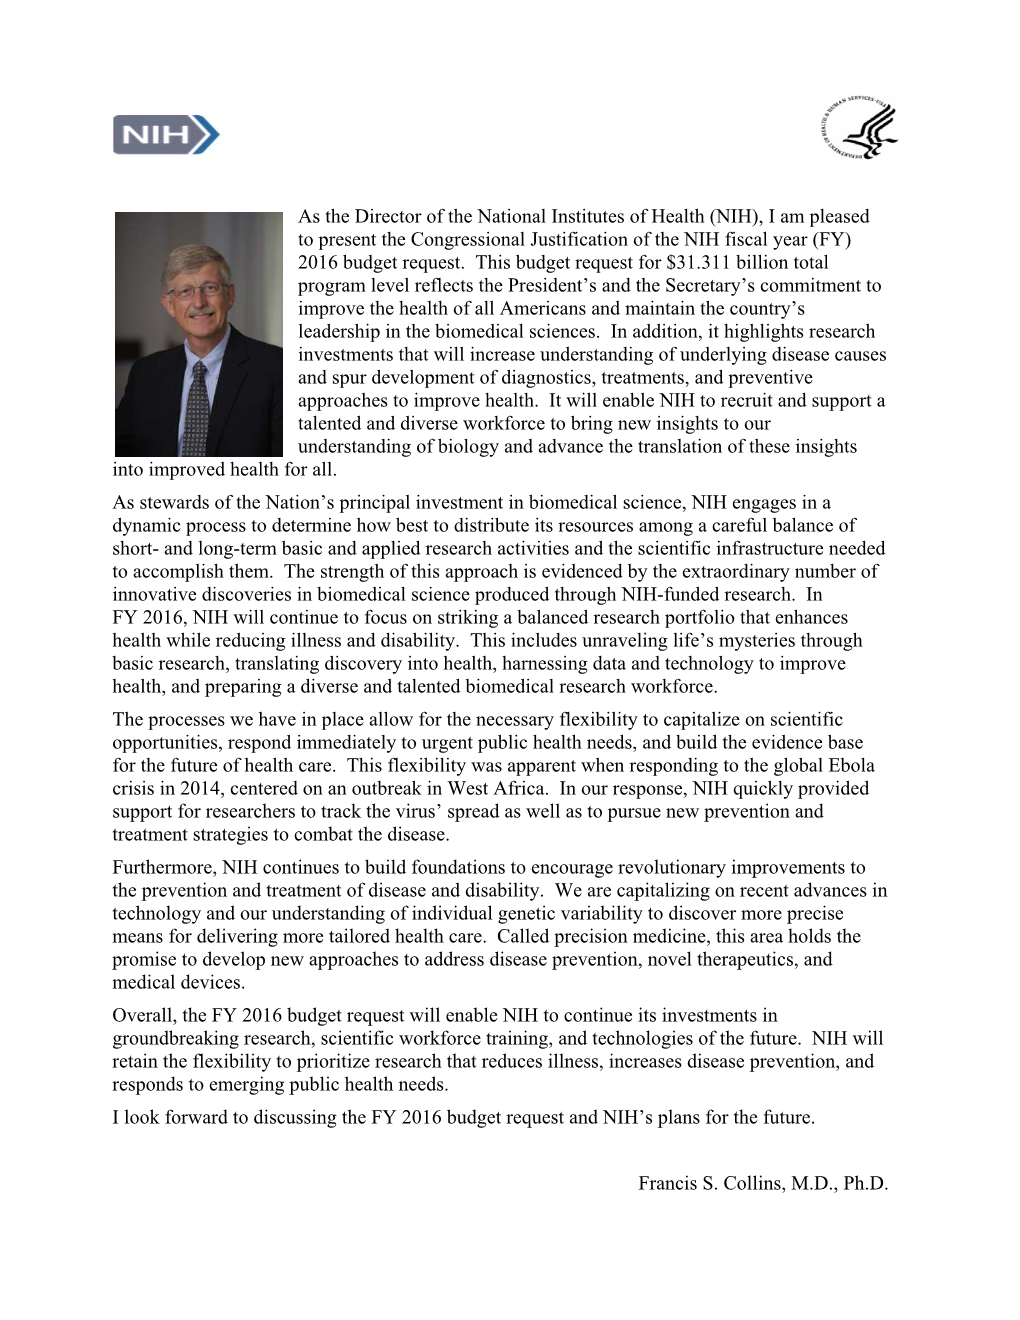 As the Director of the National Institutes of Health (NIH), I Am Pleased to Present the Congressional Justification of the NIH Fiscal Year (FY) 2016 Budget Request